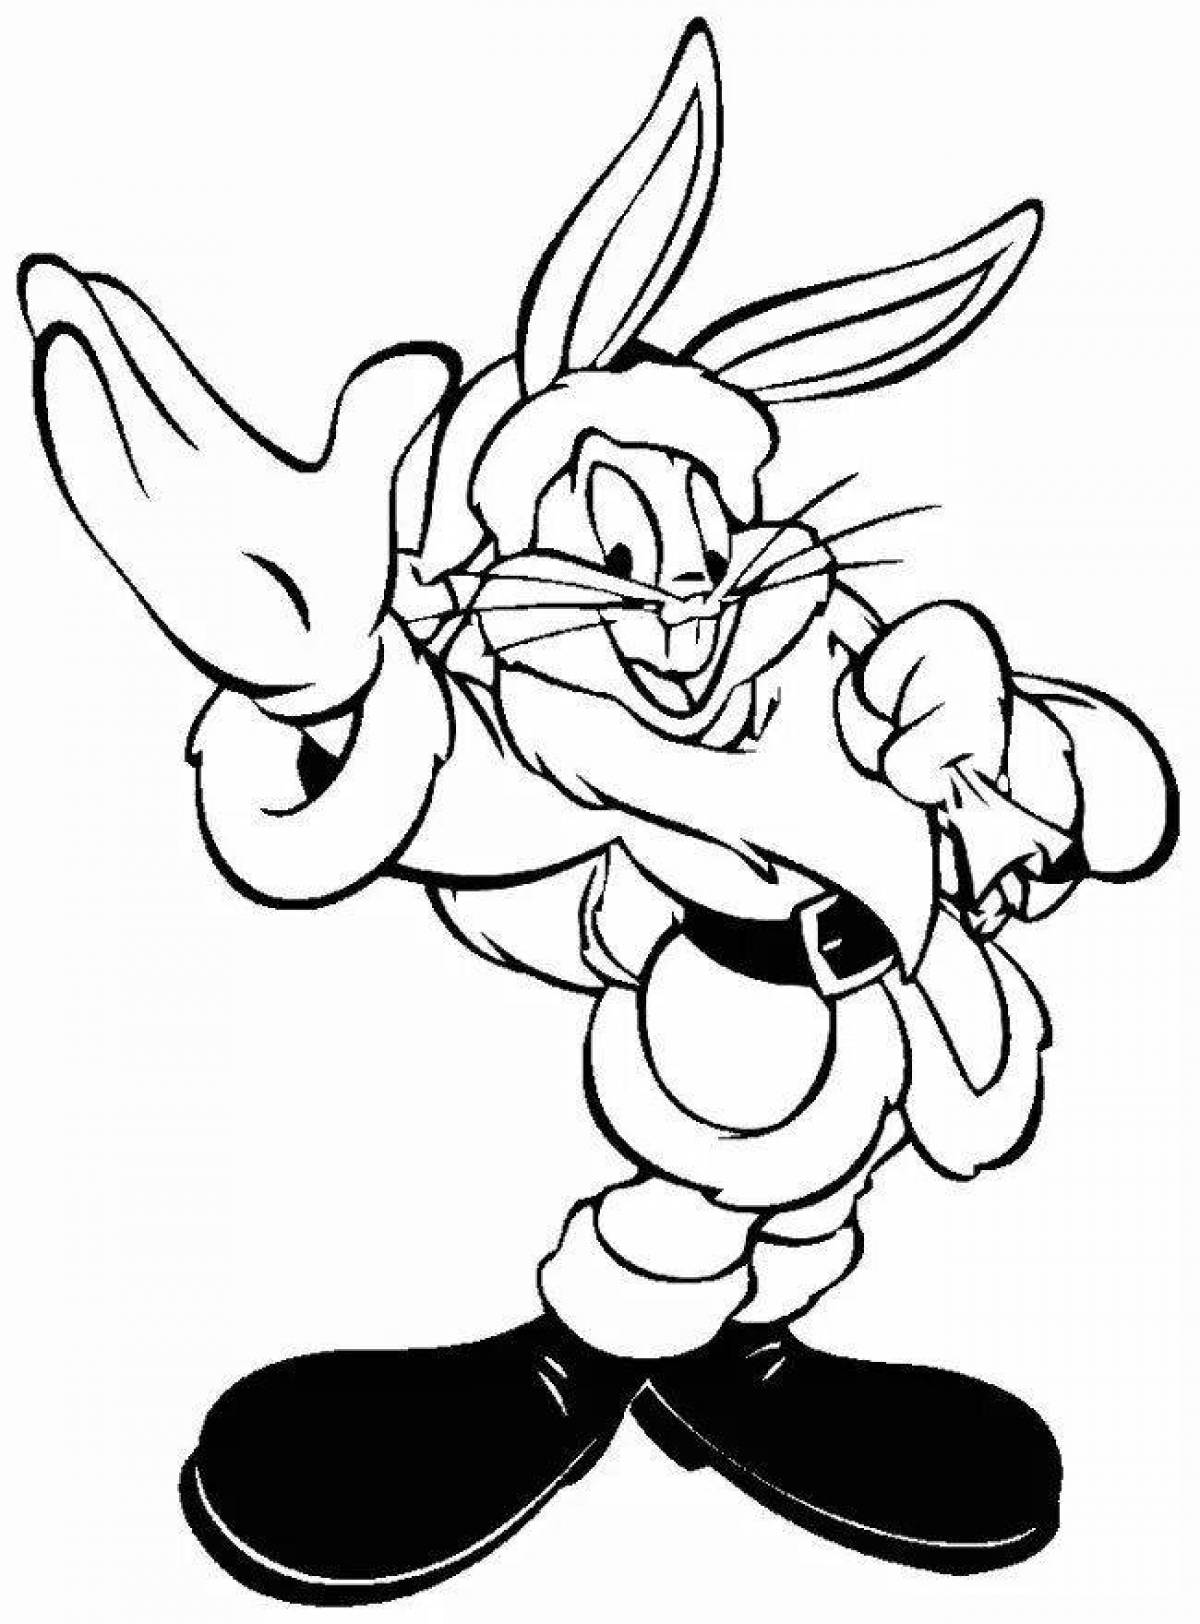 Cute bugs bunny coloring page